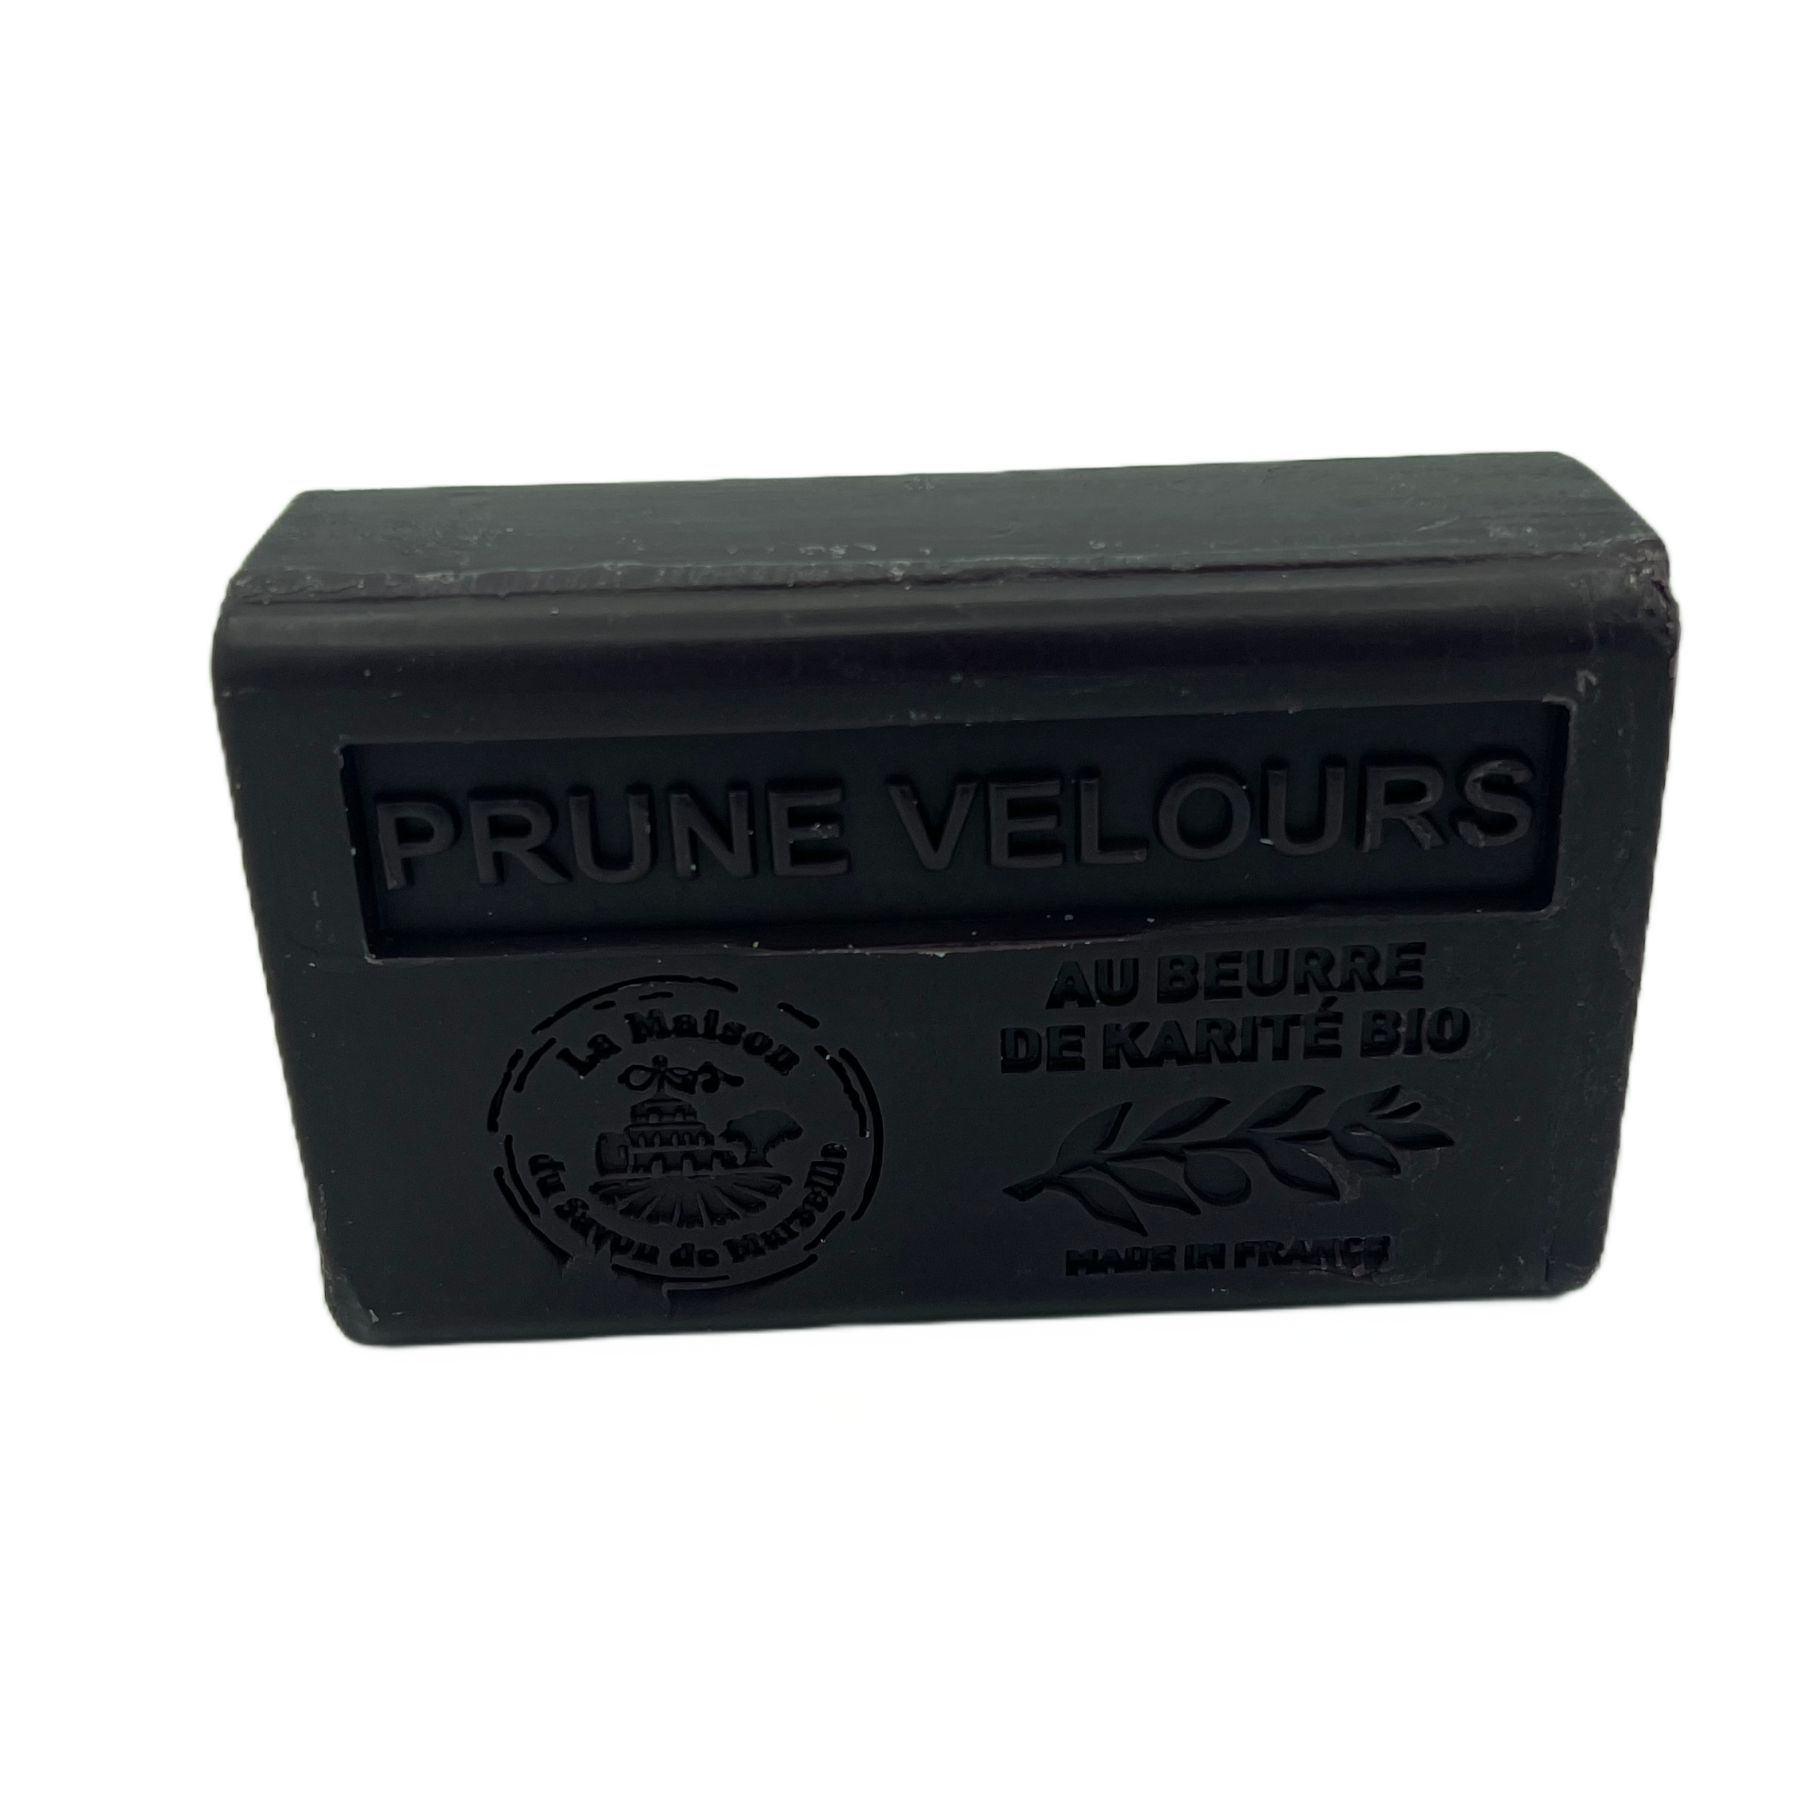 Plum (Prune Velours) French Soap with Organic Shea Butter 125g